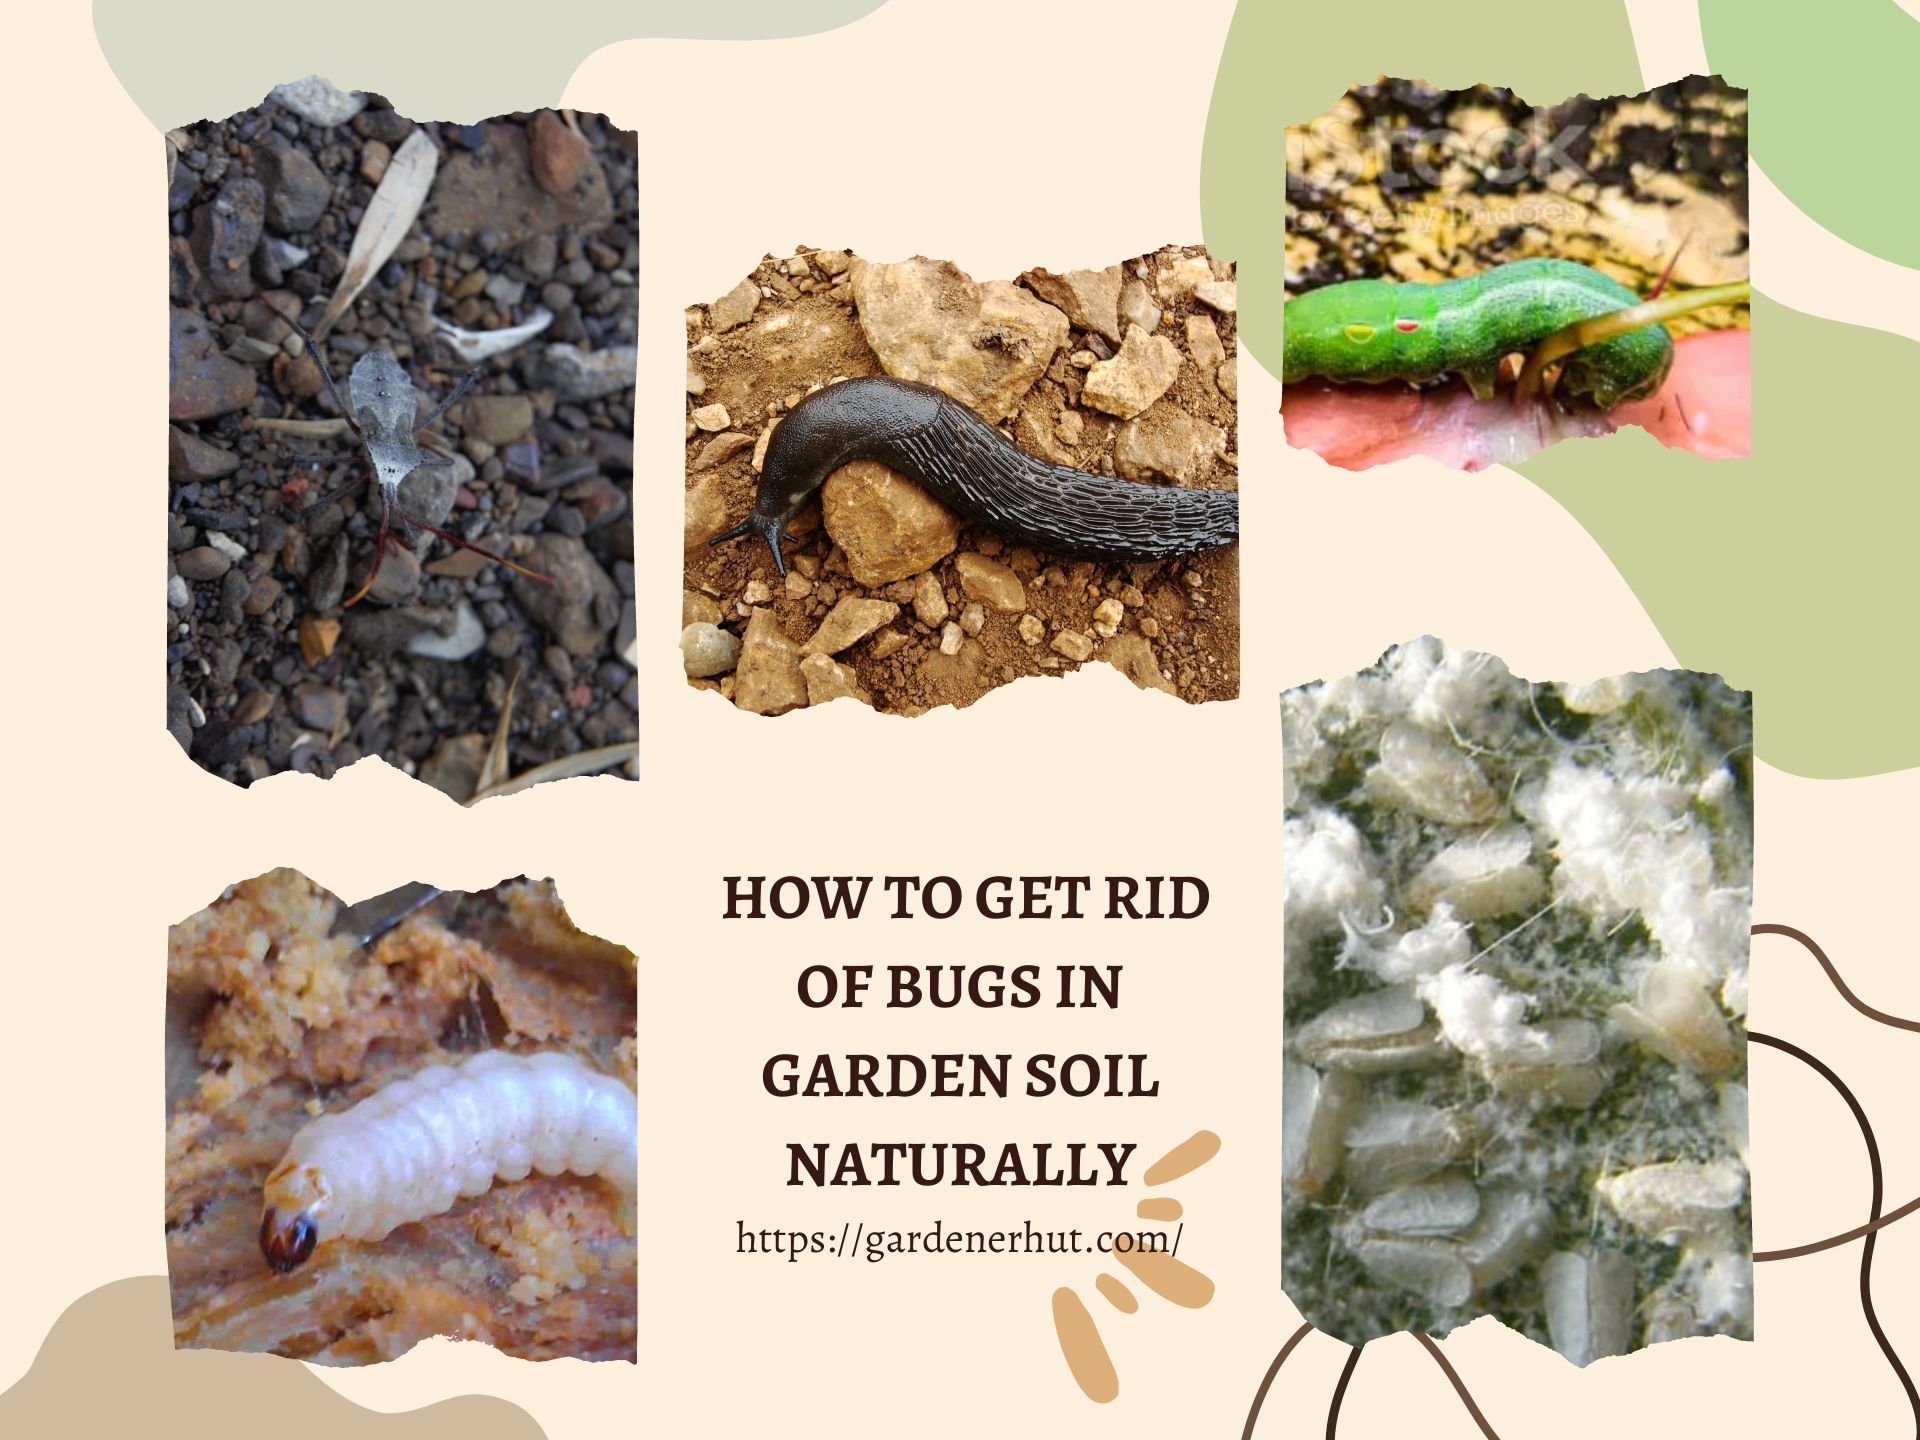 How to Get Rid of Bugs in Garden Soil Naturally